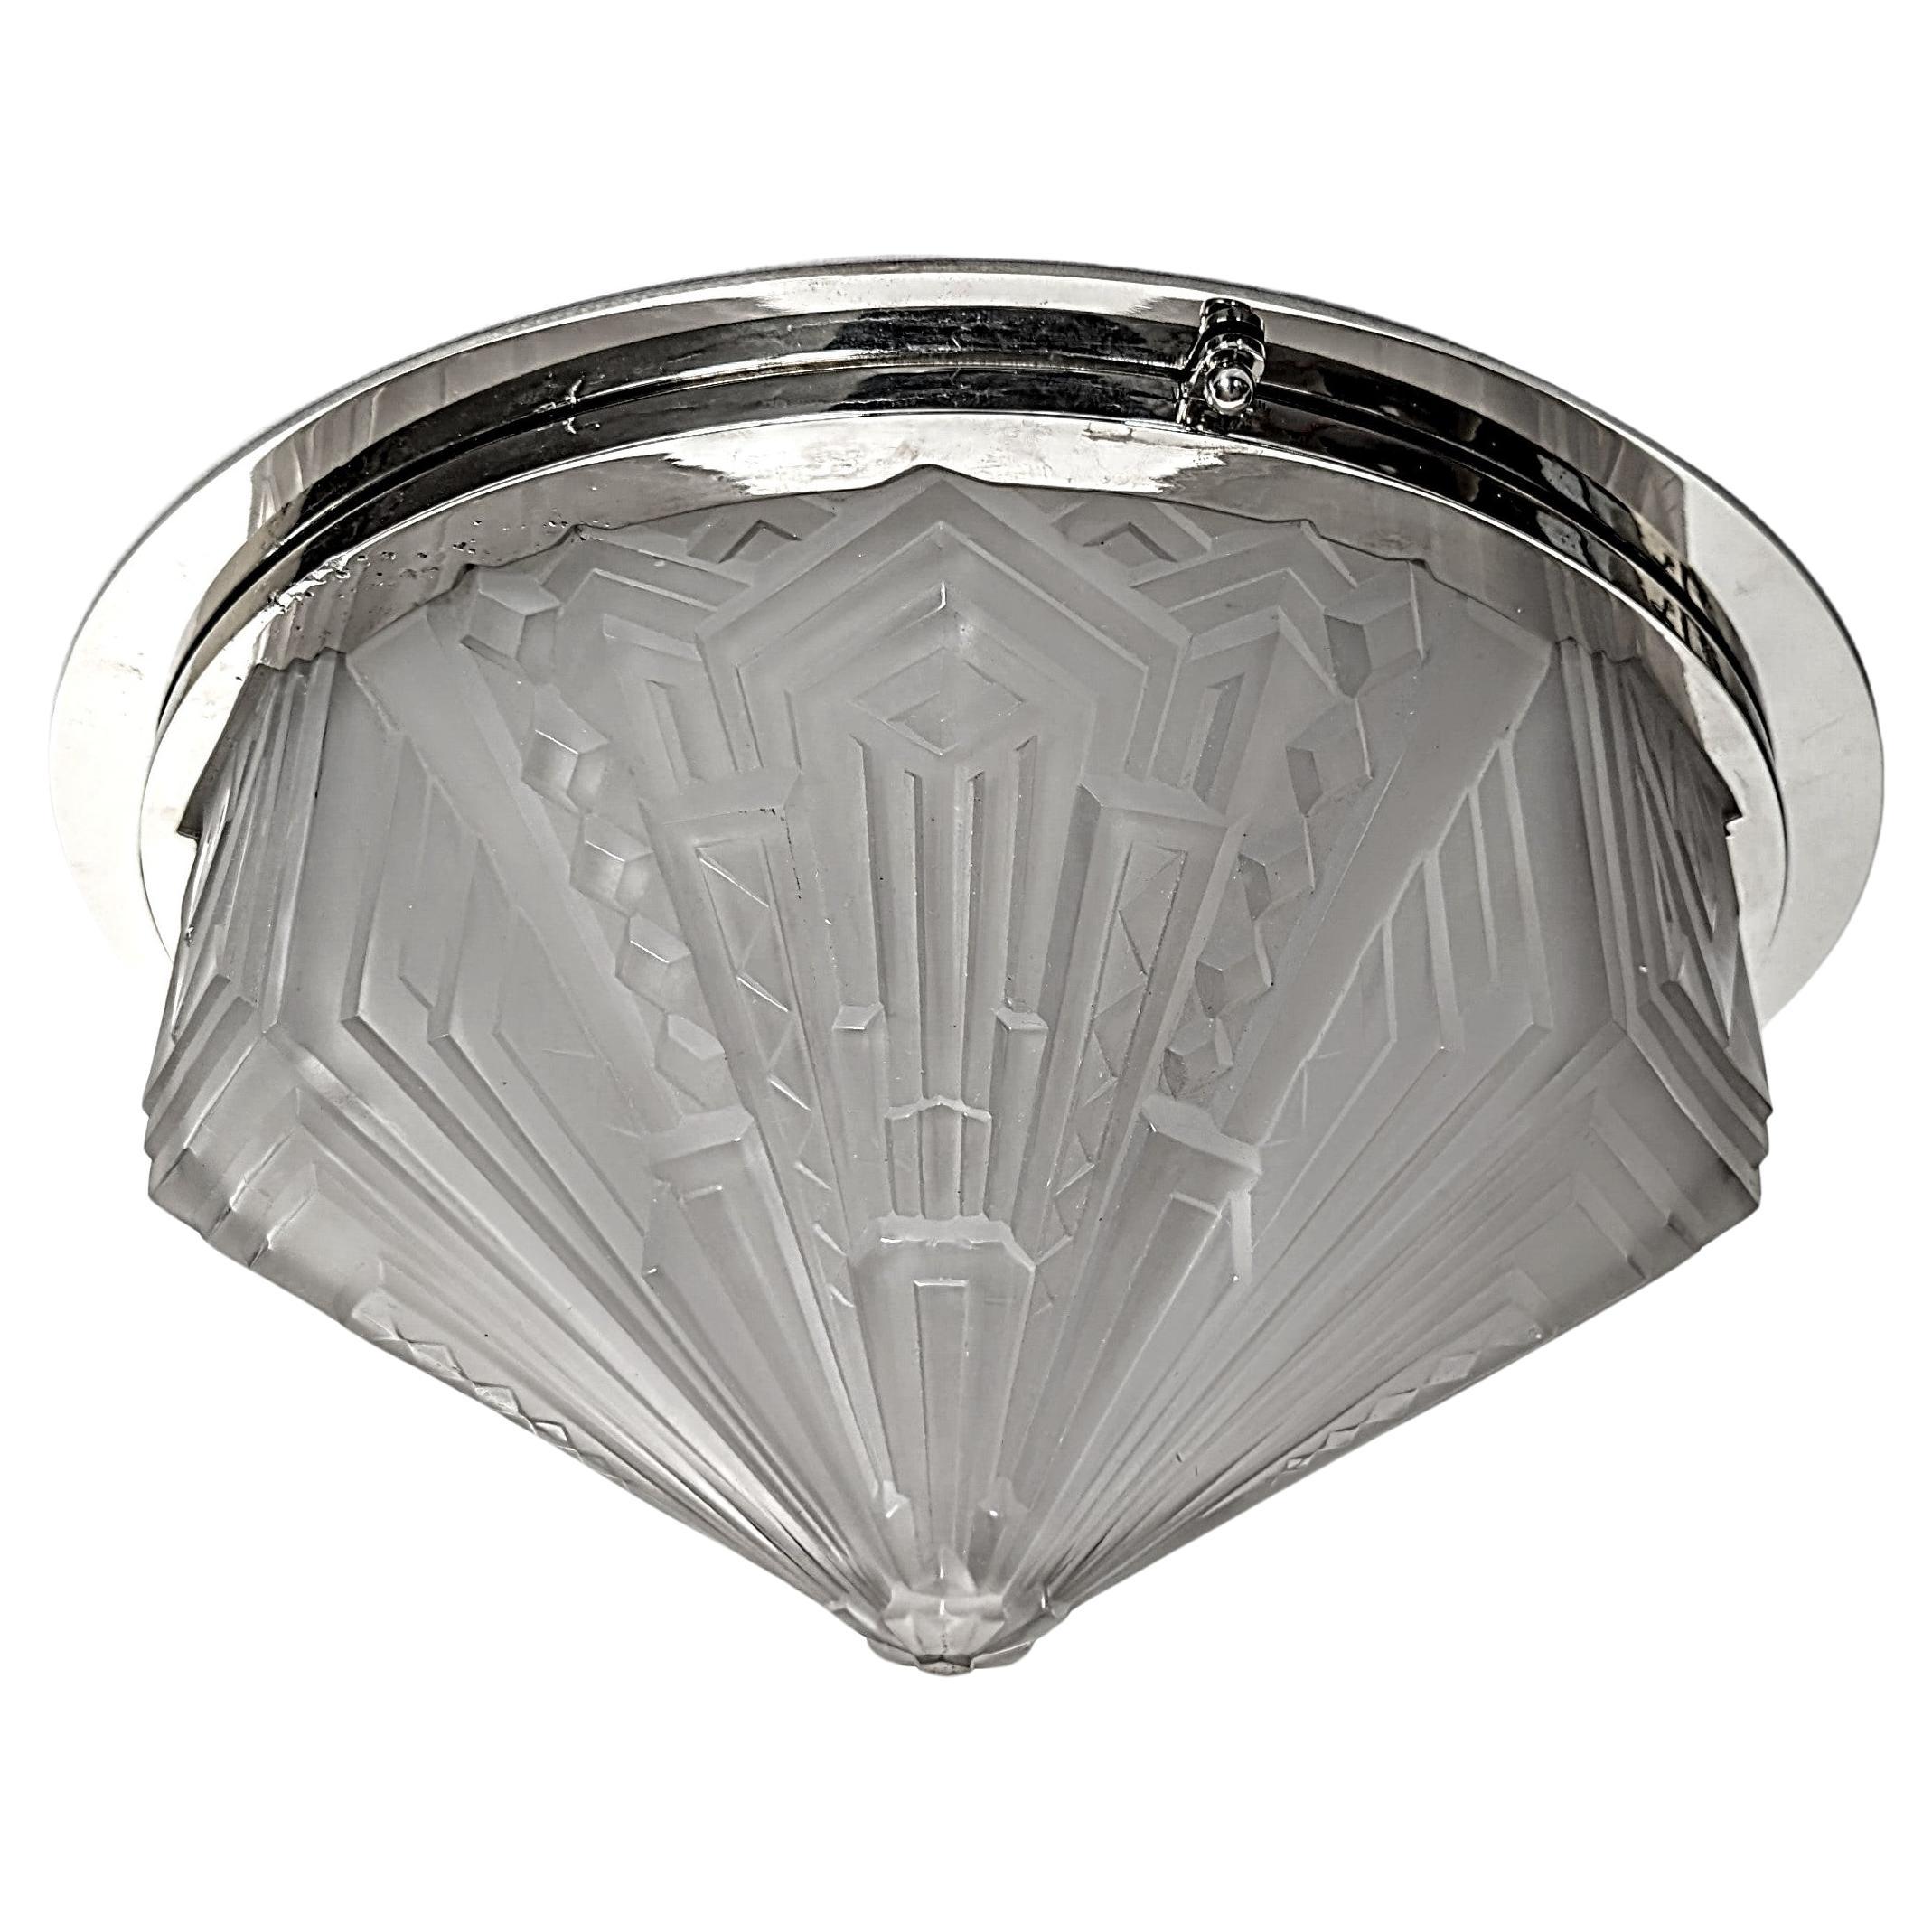 A very unusual hard to come by French Art Deco flush mount was created by 